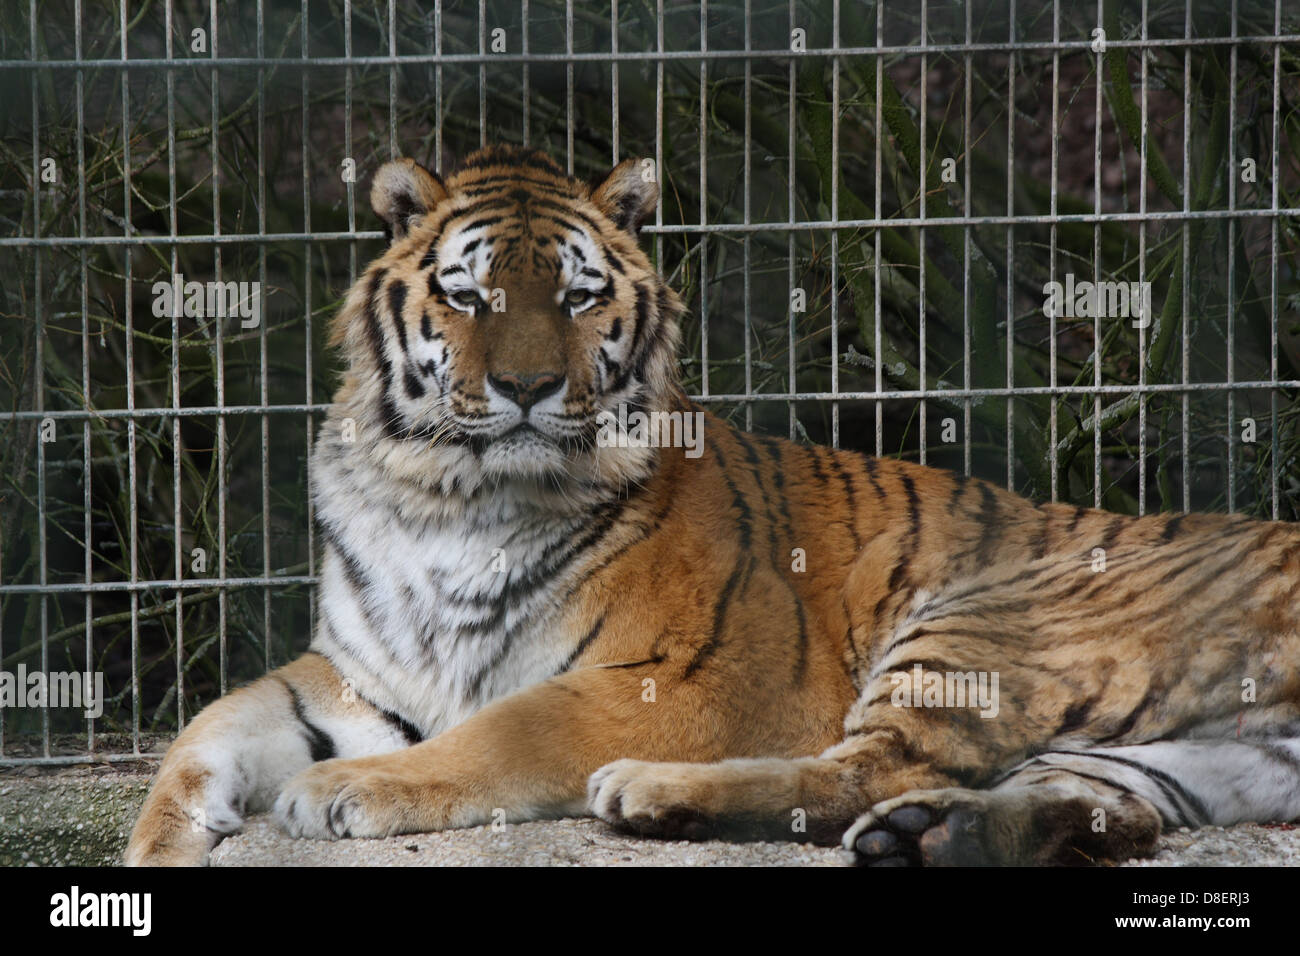 Tiger sitting down in a zoo enclosure. Stock Photo